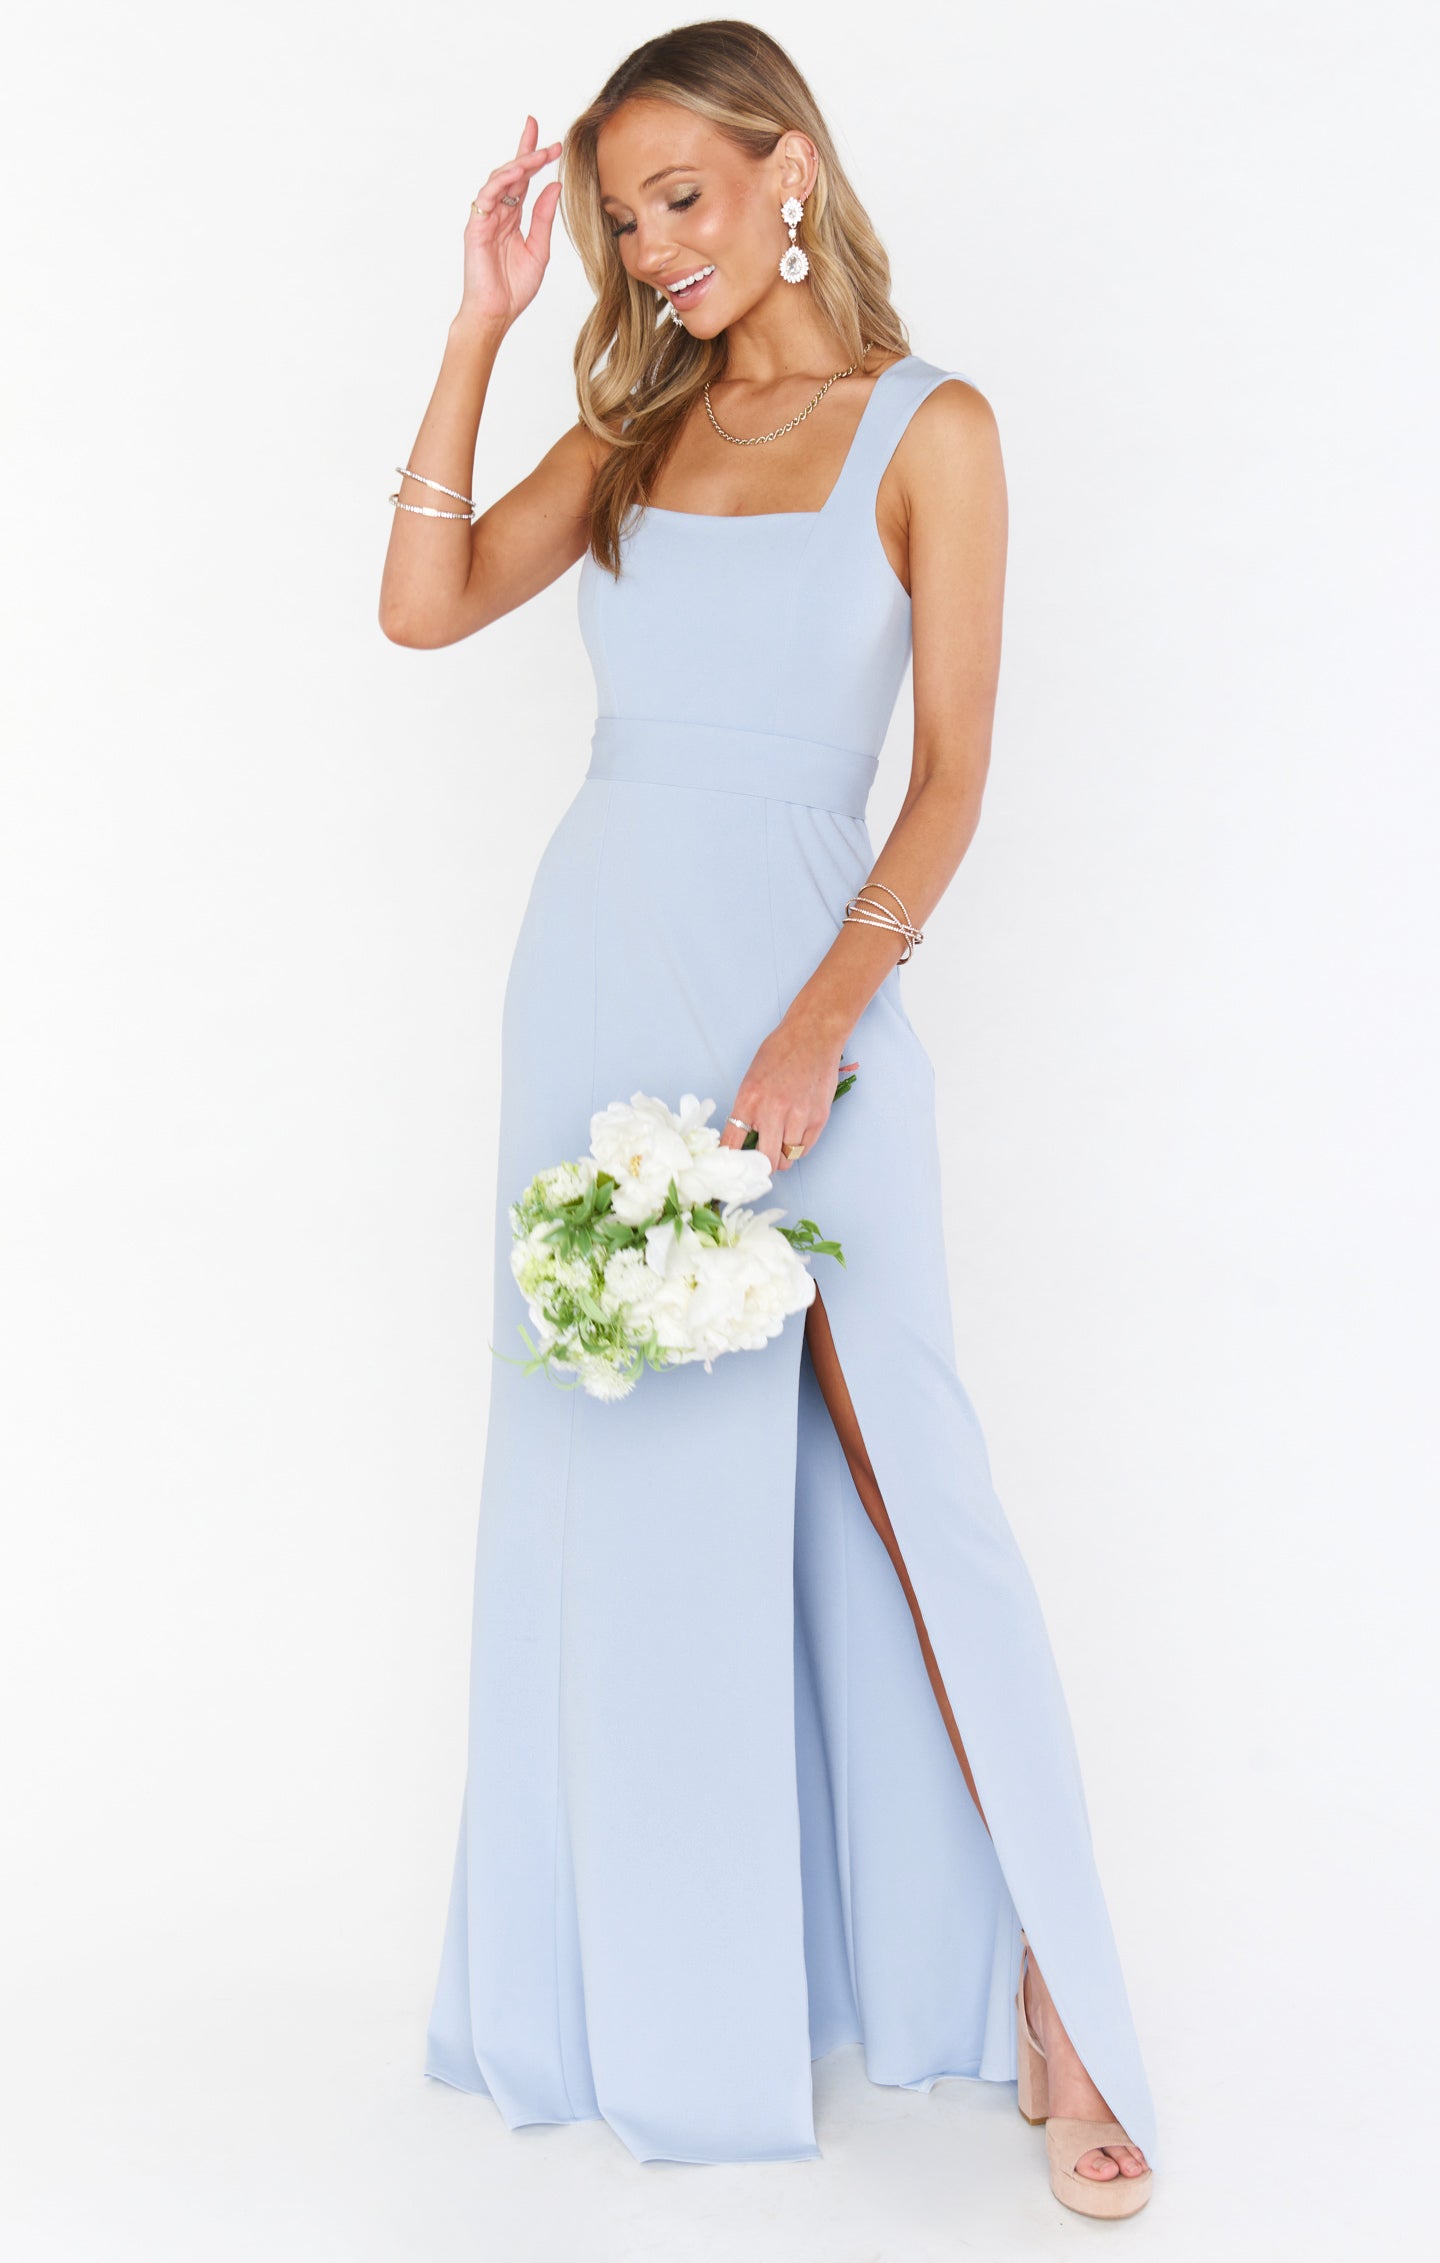 Can't wait for my dress...show me yours!! | Weddings, Wedding Attire |  Wedding Forums | WeddingWire